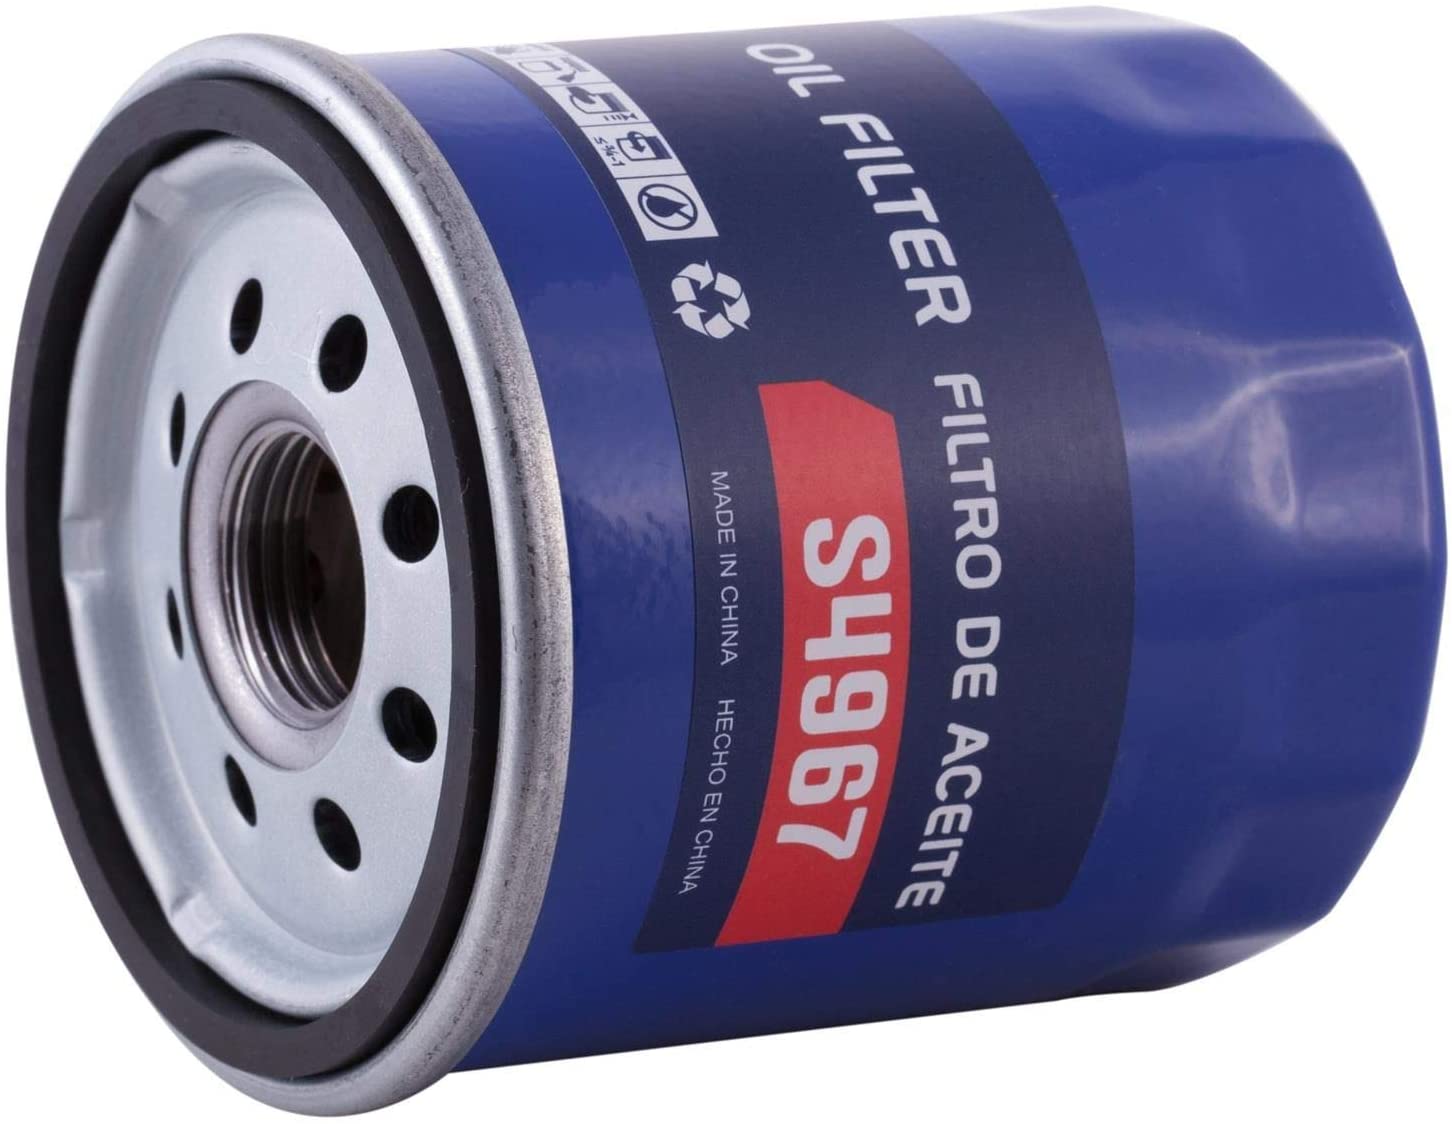 STP Oil Filter S4967 - Engineered To Last Up To 5,000 Miles!